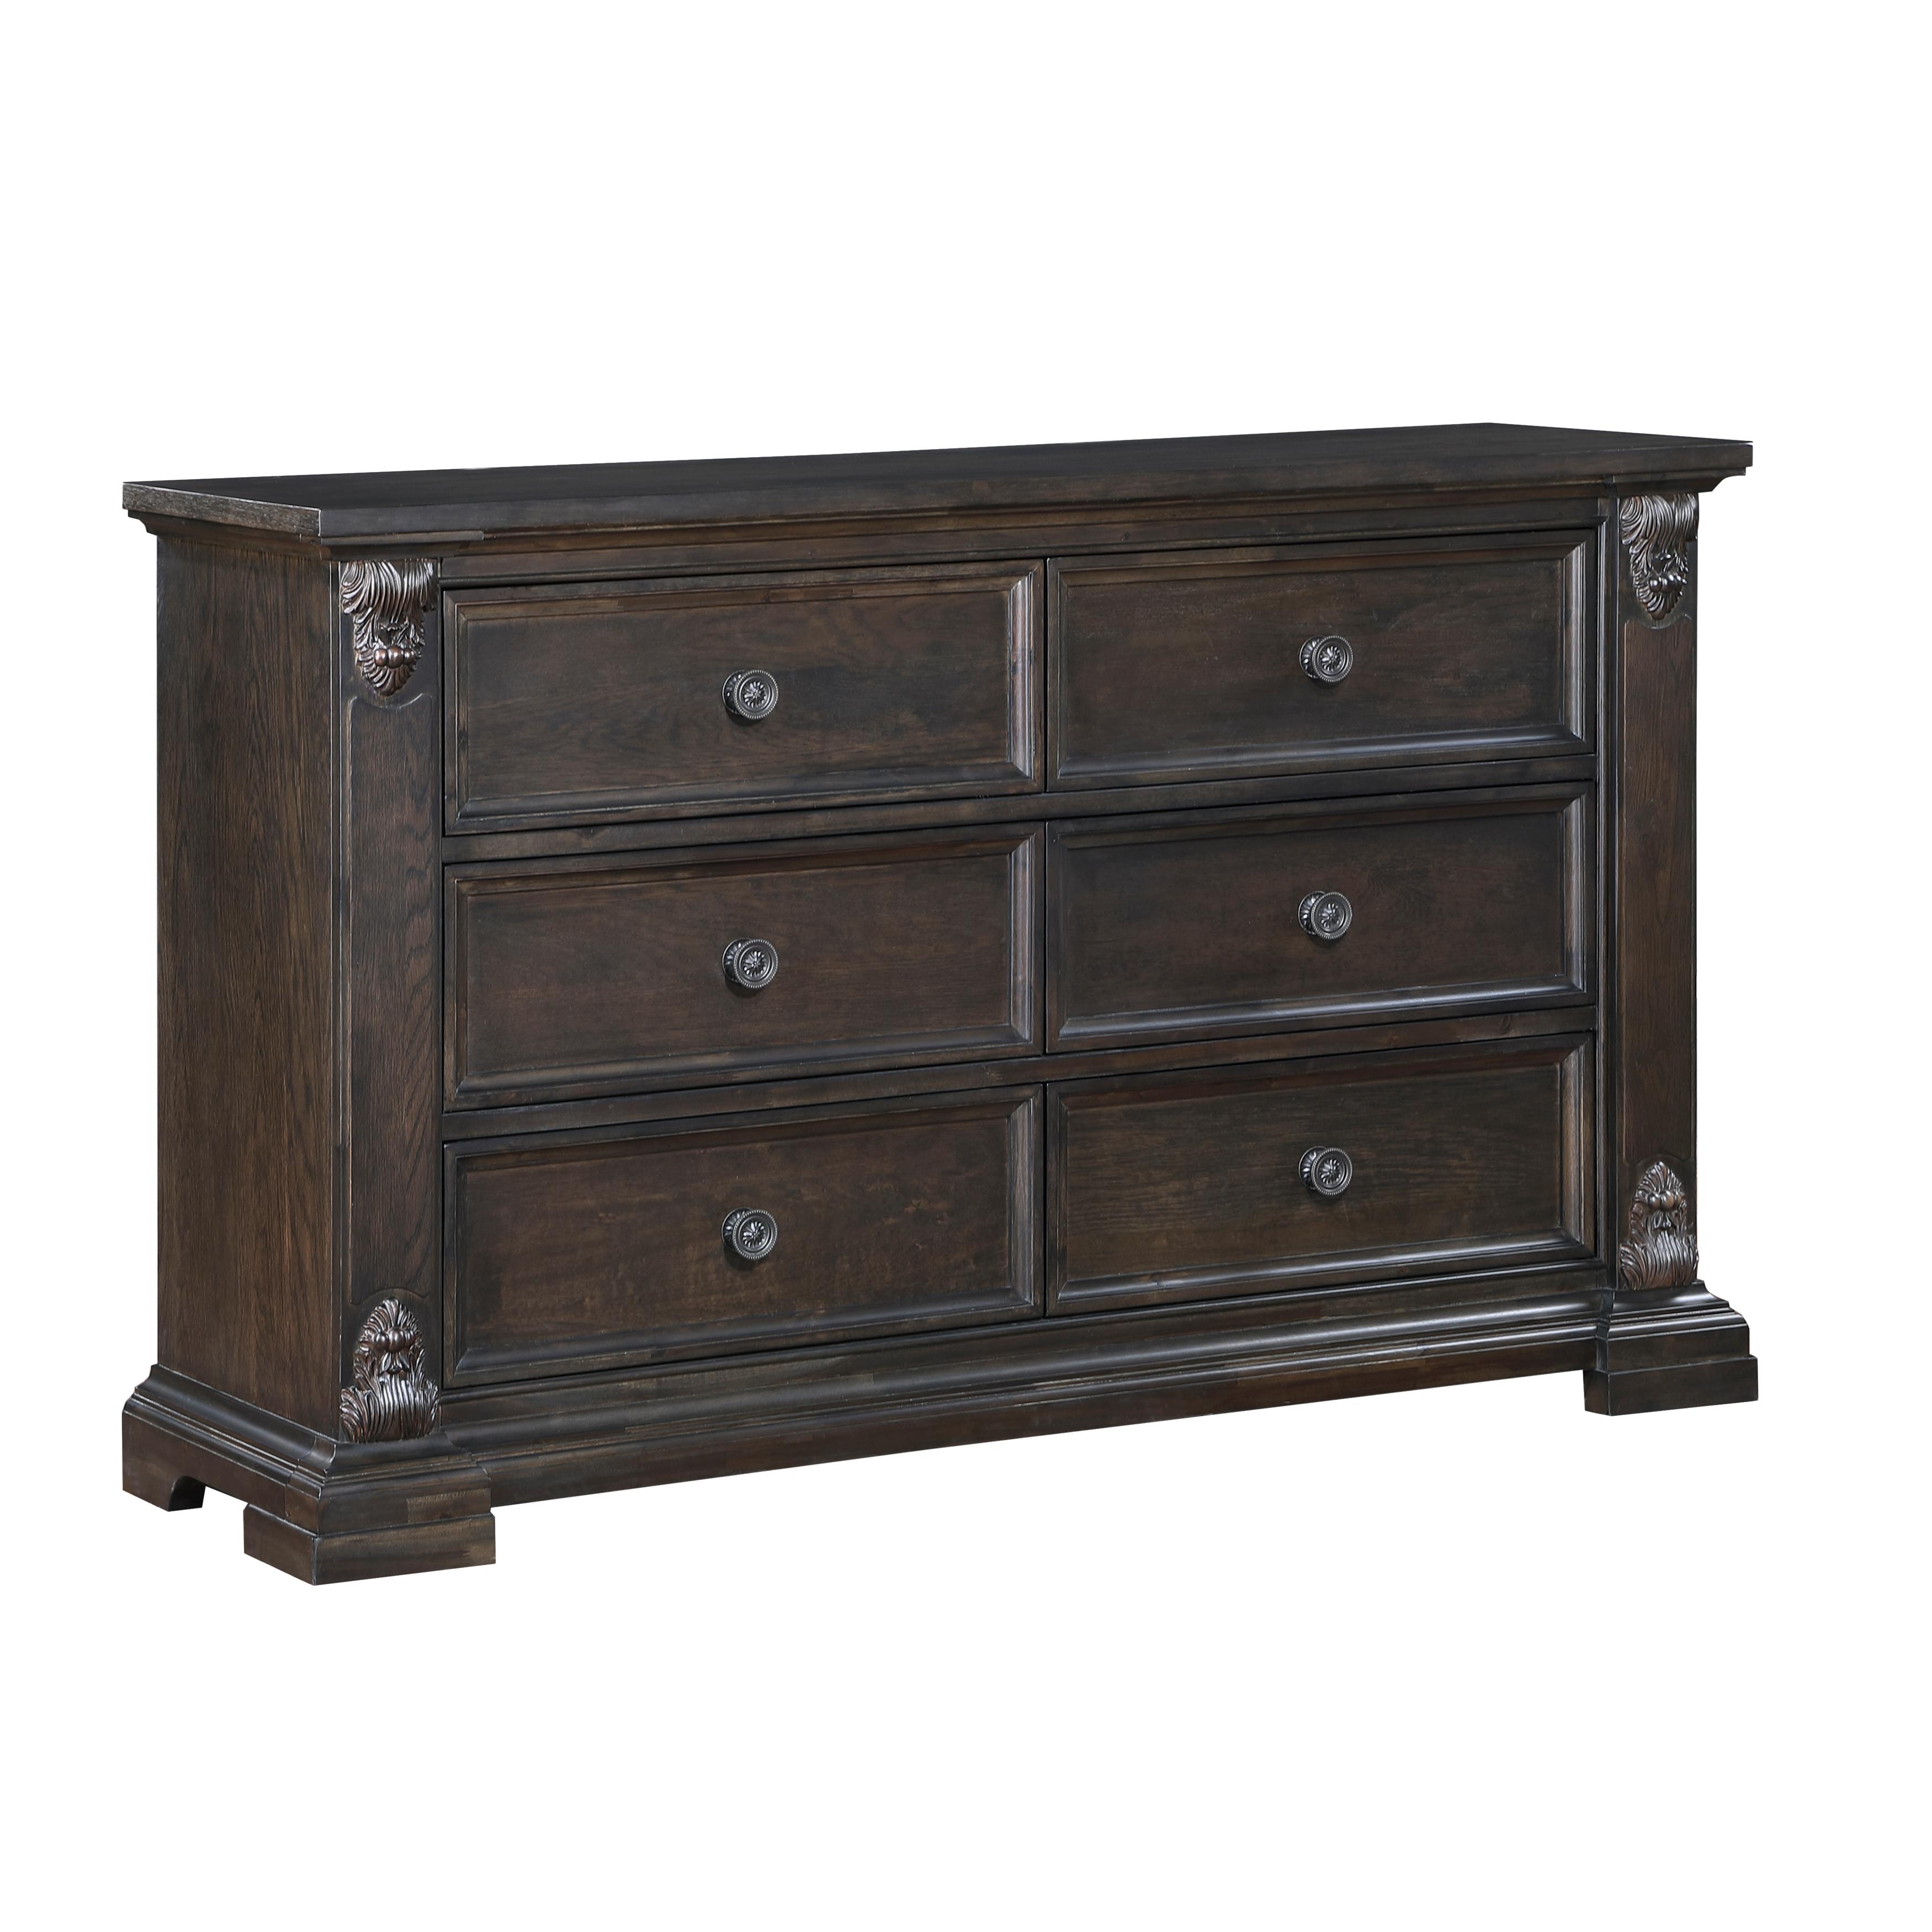 Traditional Dresser With Mirror Cornwall Dresser With Mirror Set 2PCS 1325-5-D-2PCS 1325-5-D-2PCS in Espresso 